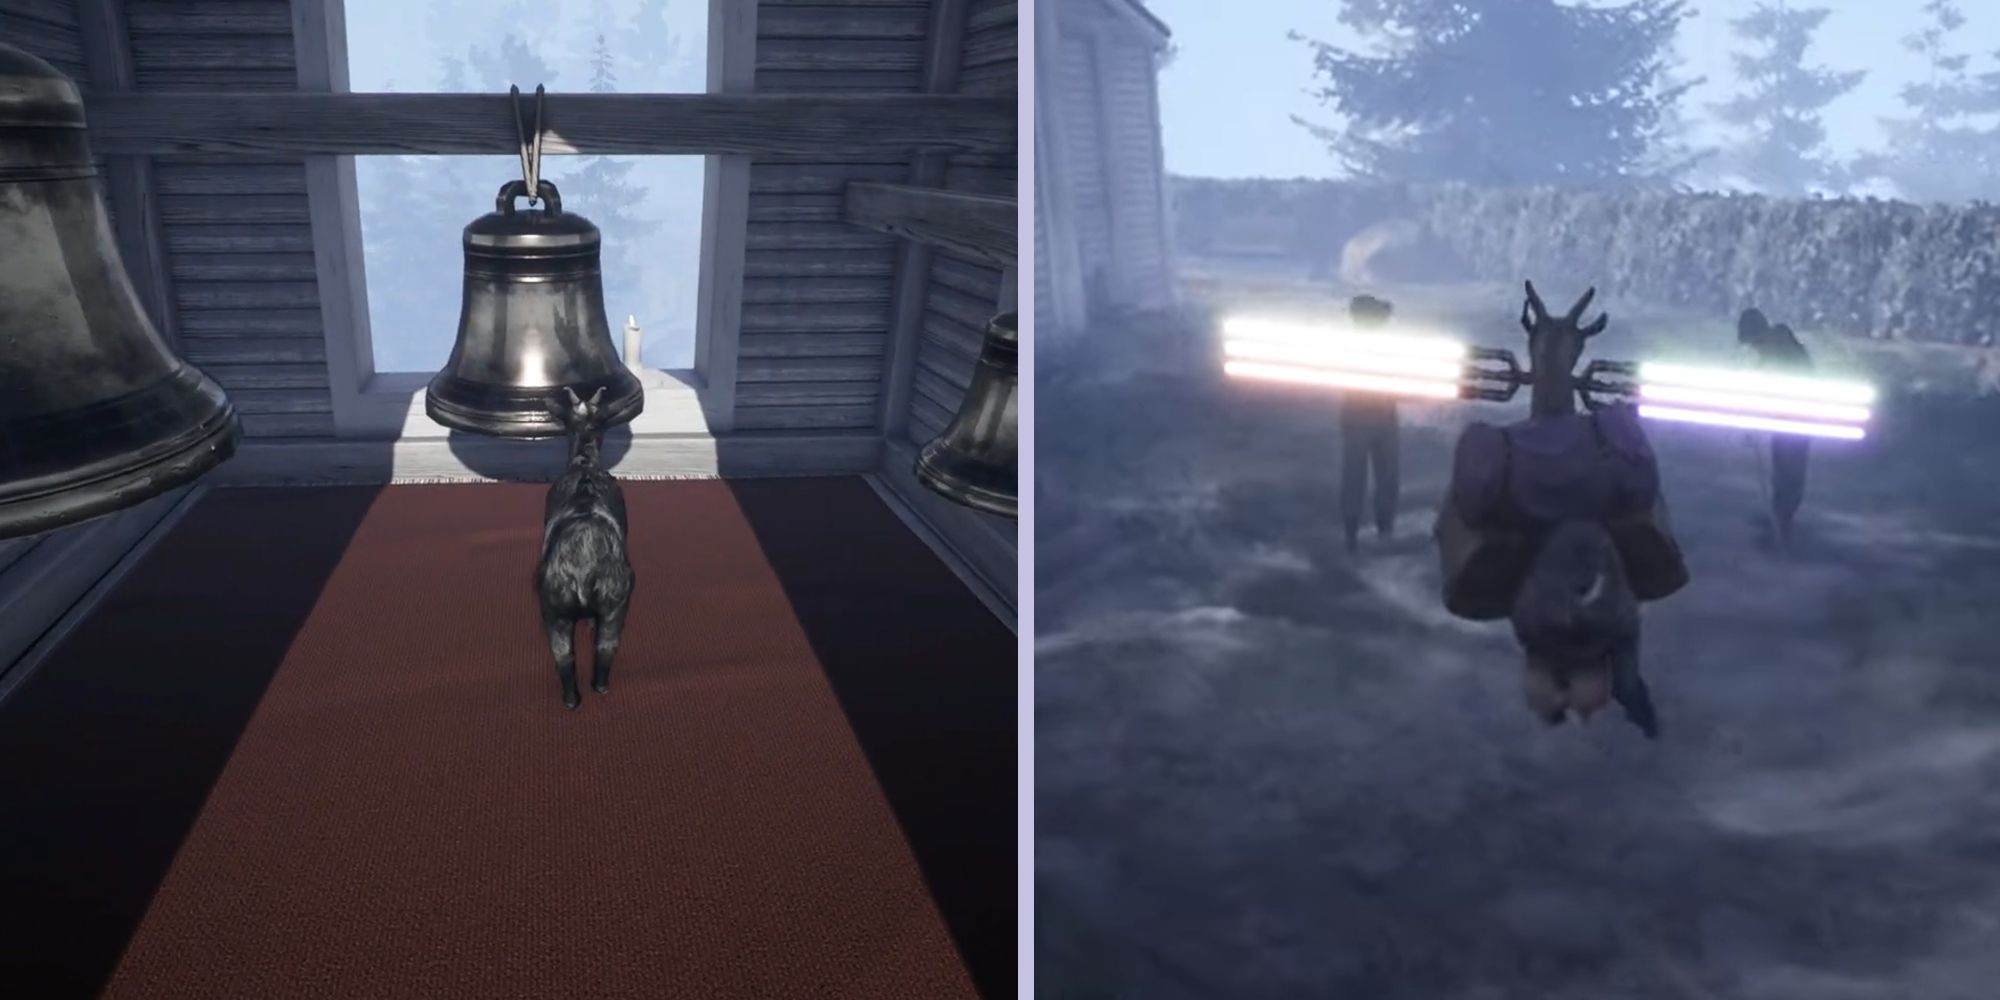 Goat plays Imperial March from Star Wars to unlock Lightsaber in Goat Simulator 3